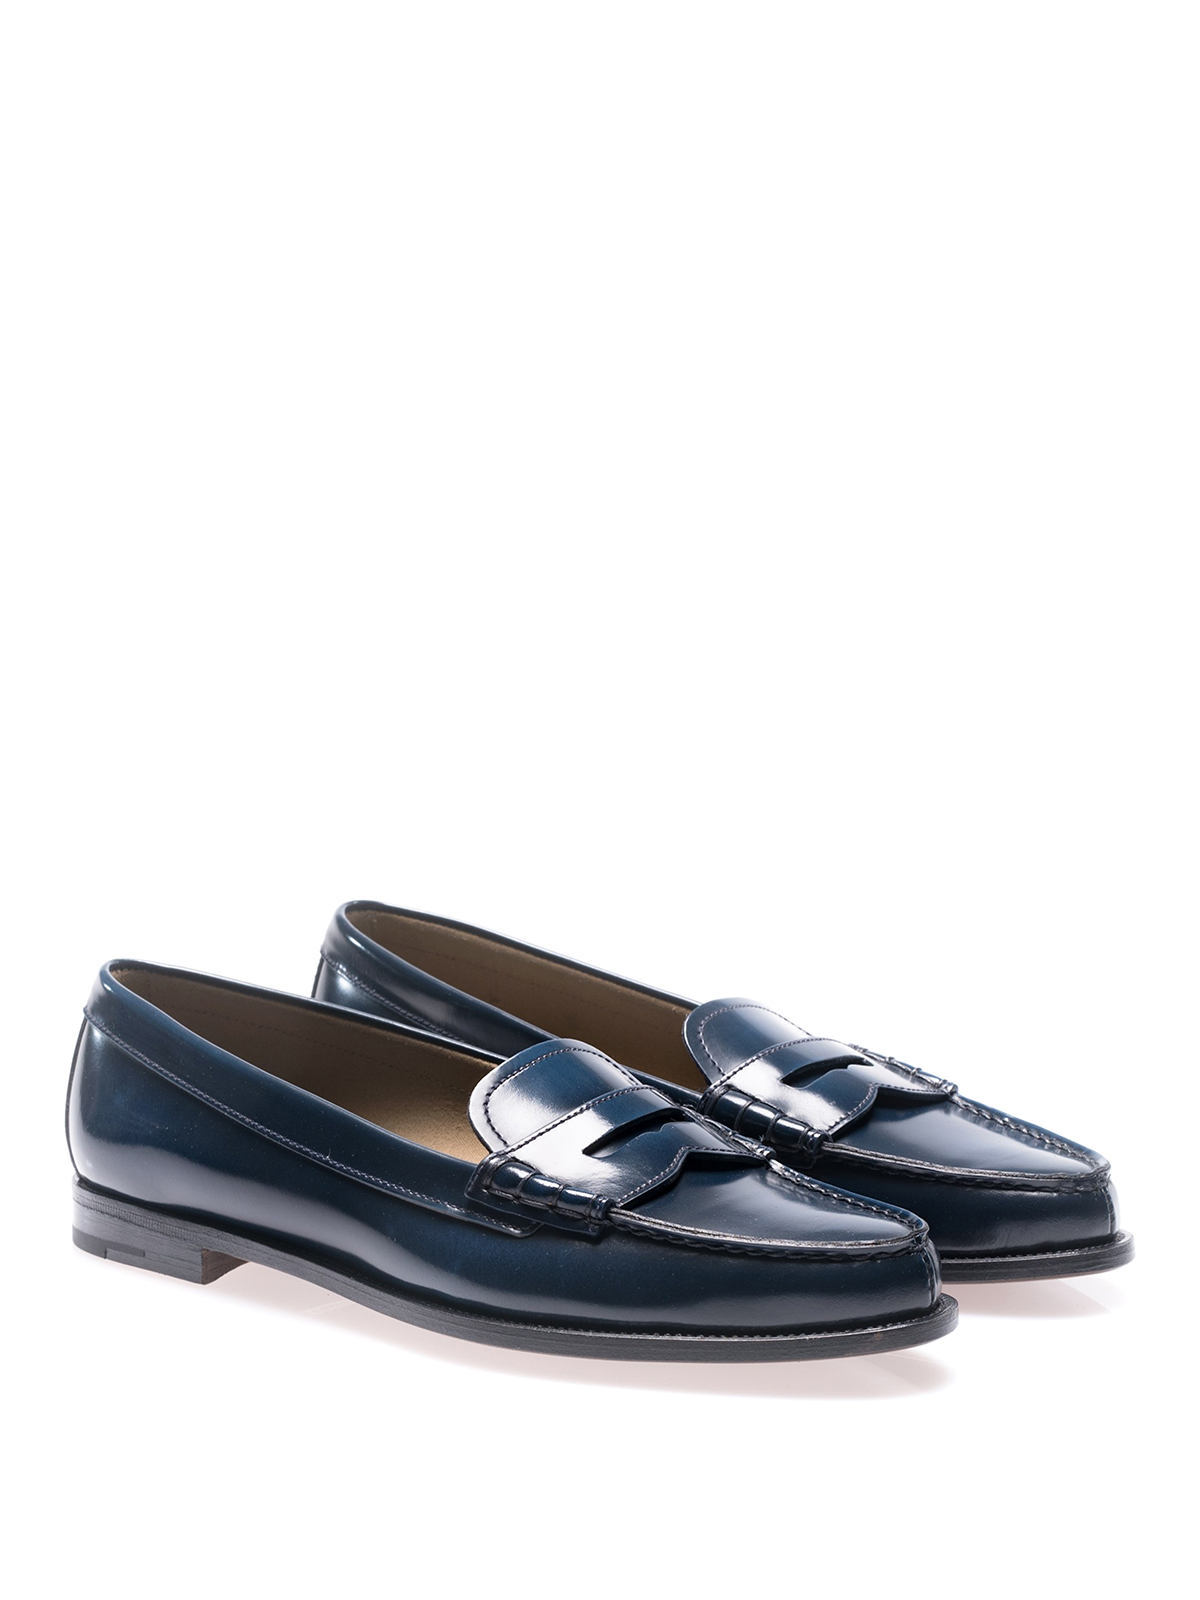 Loafers & Slippers Church's - Kara blue brushed leather loafers